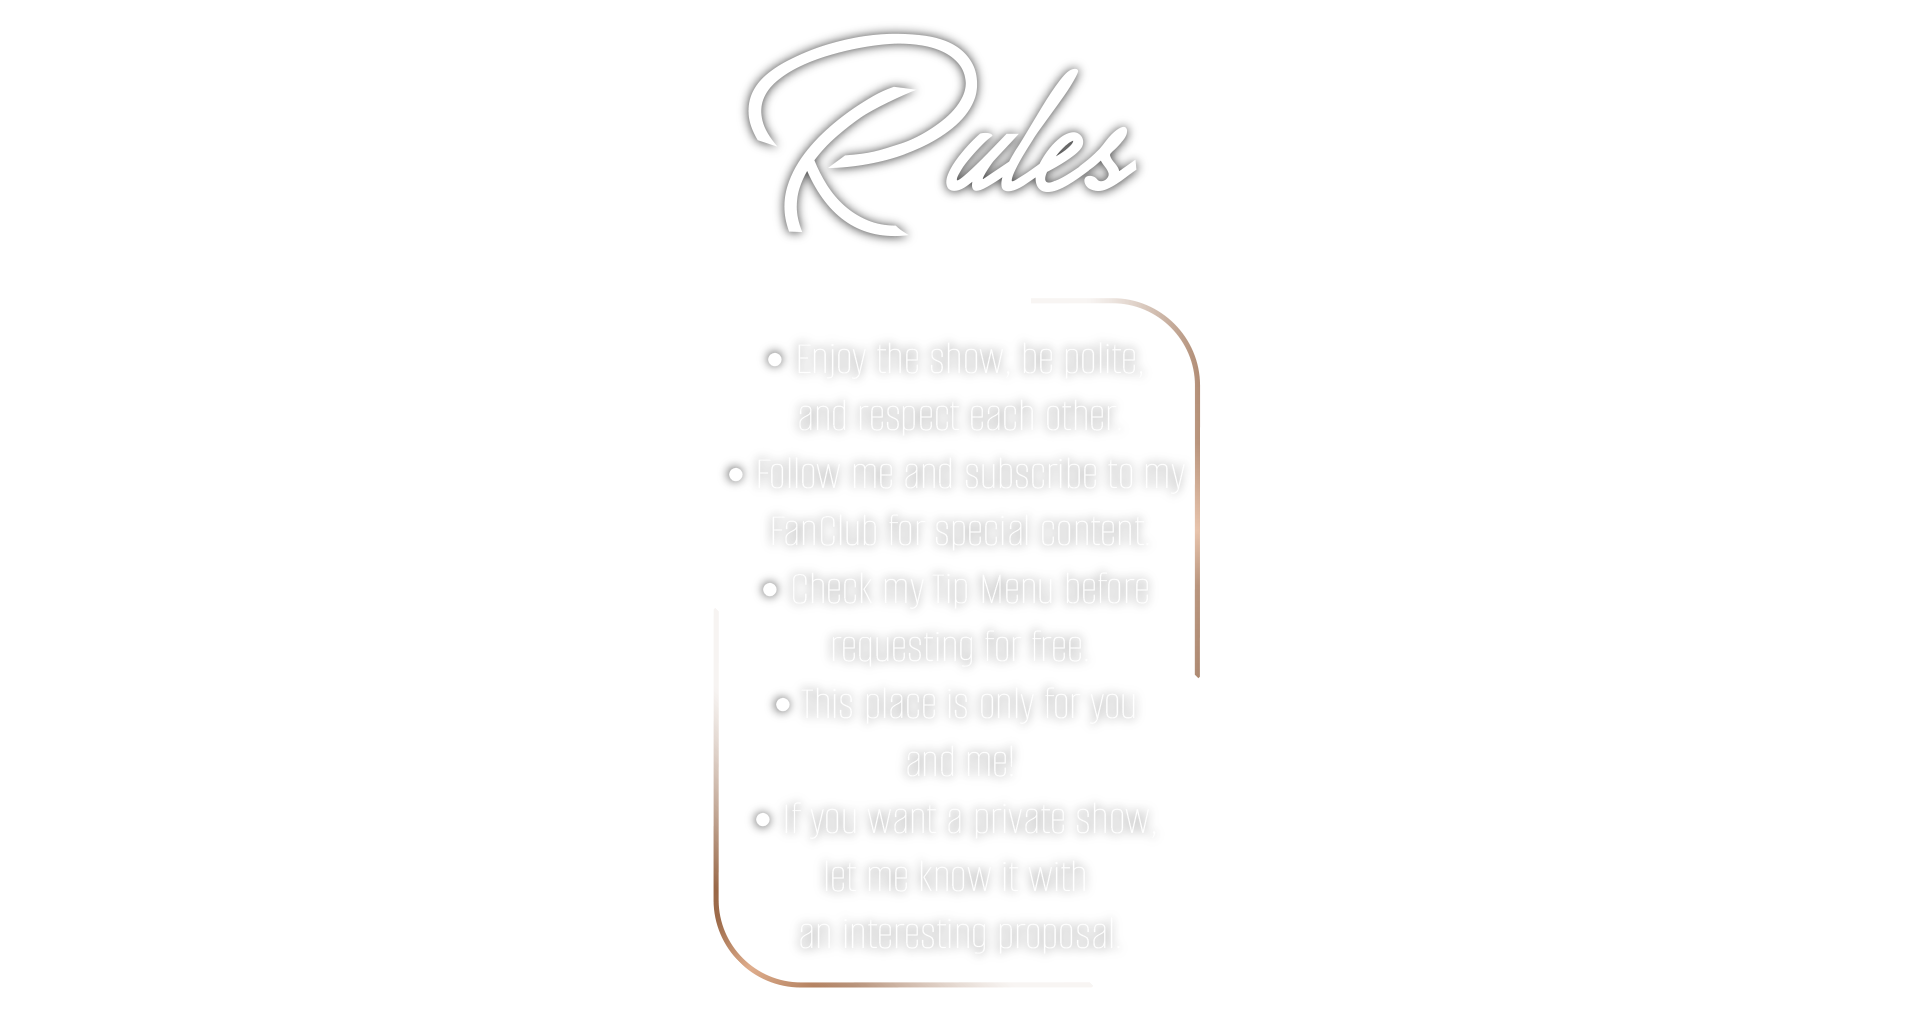 TianaEvans Rules image: 1